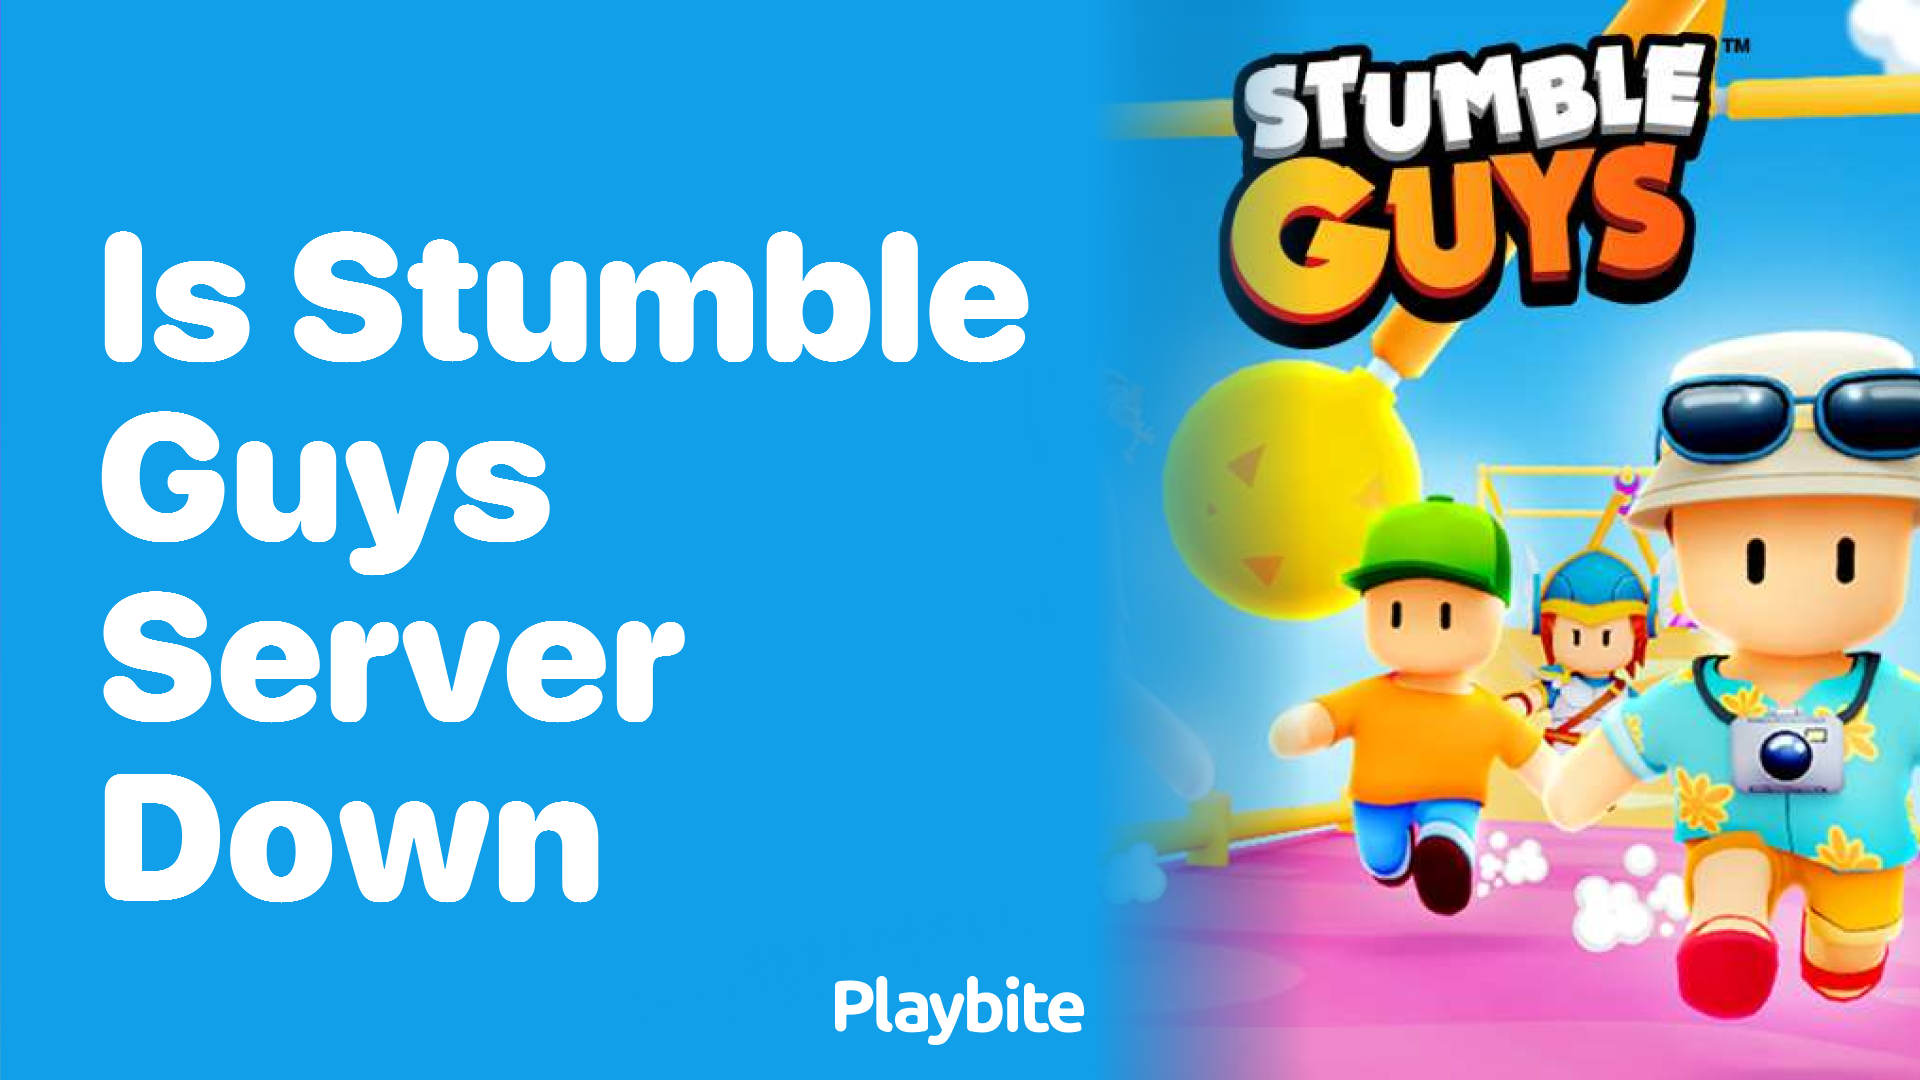 Is the Stumble Guys Server Down Right Now?